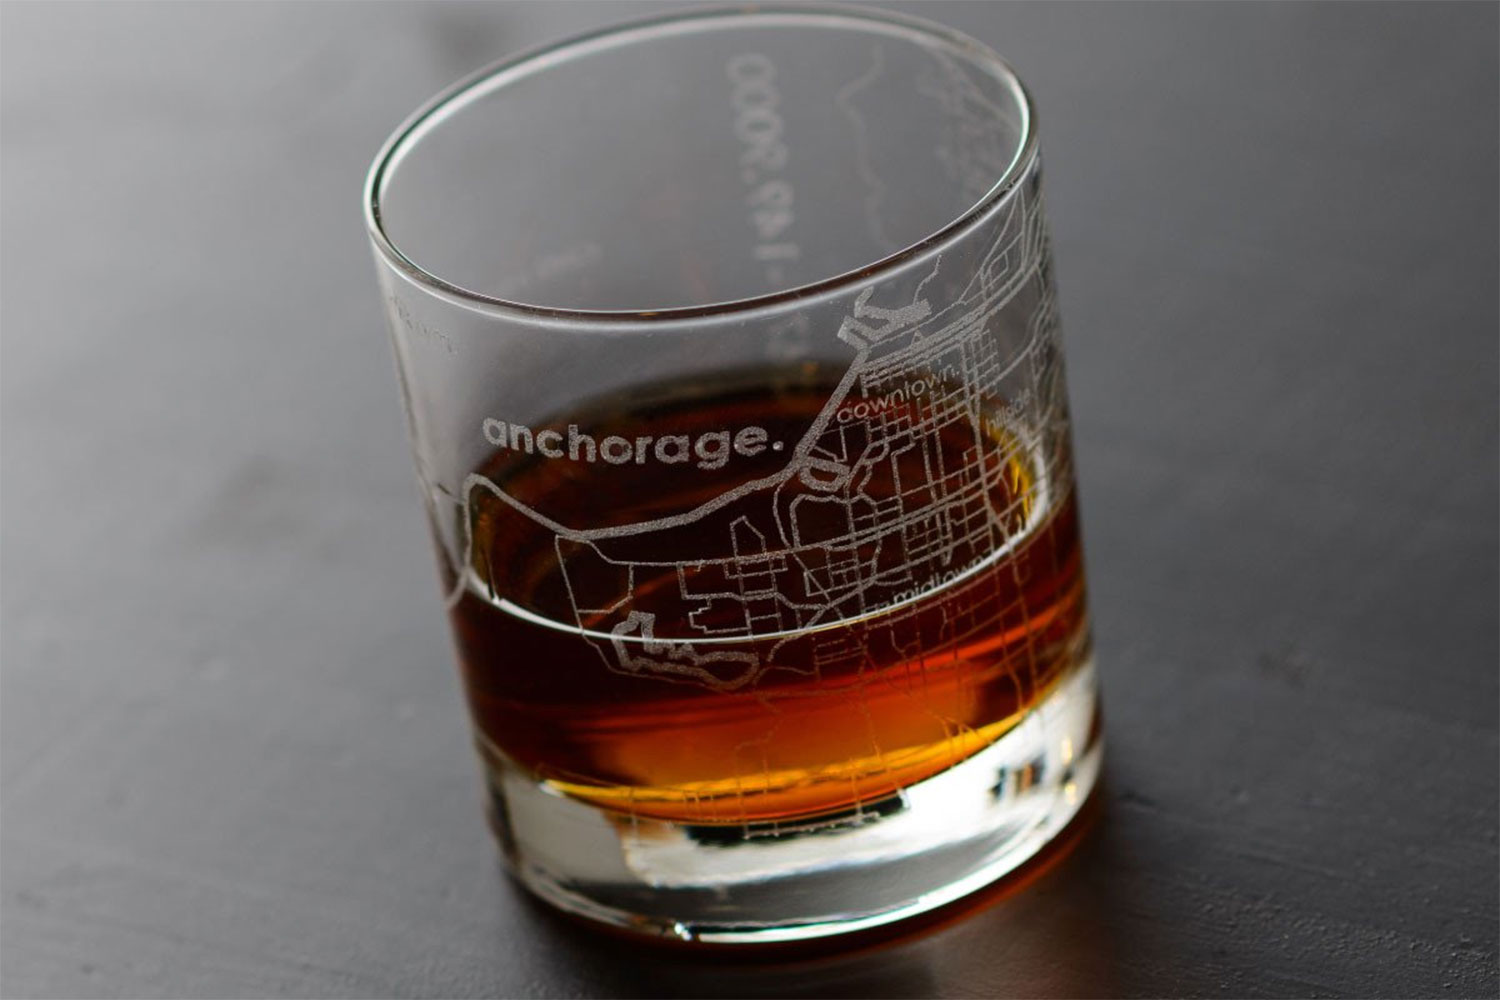 Dark Glass Whisky Glasses Set by Nicely Home - Bourbon Culture